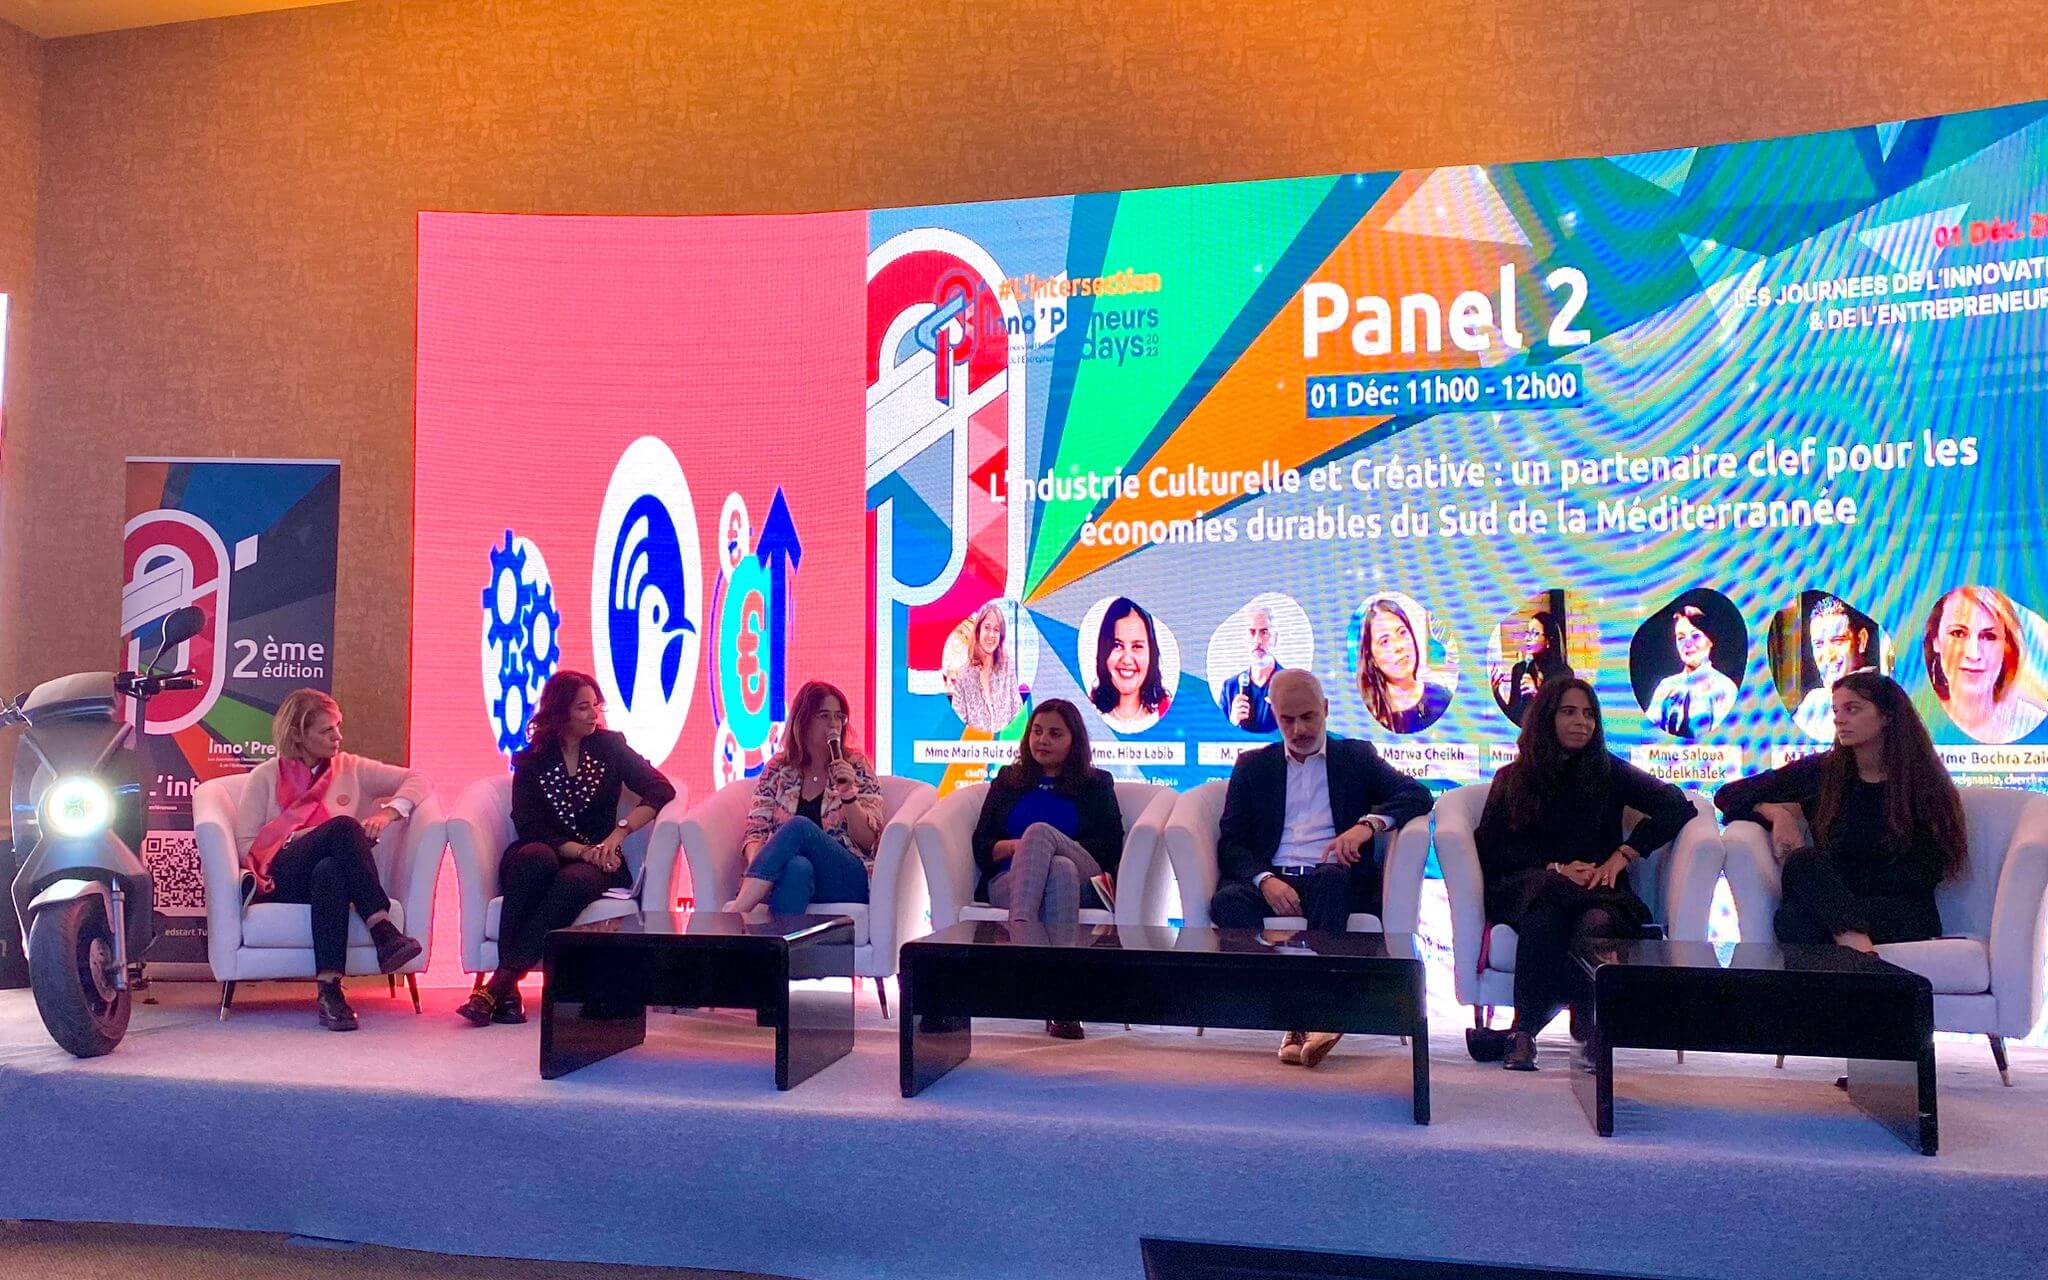 EMEA's Senior Project Manager, Maria Ruiz, participated in the RedStart Tunisie IP Days 2023 in Tunisia, highlighting the success of the CREACT4MED project